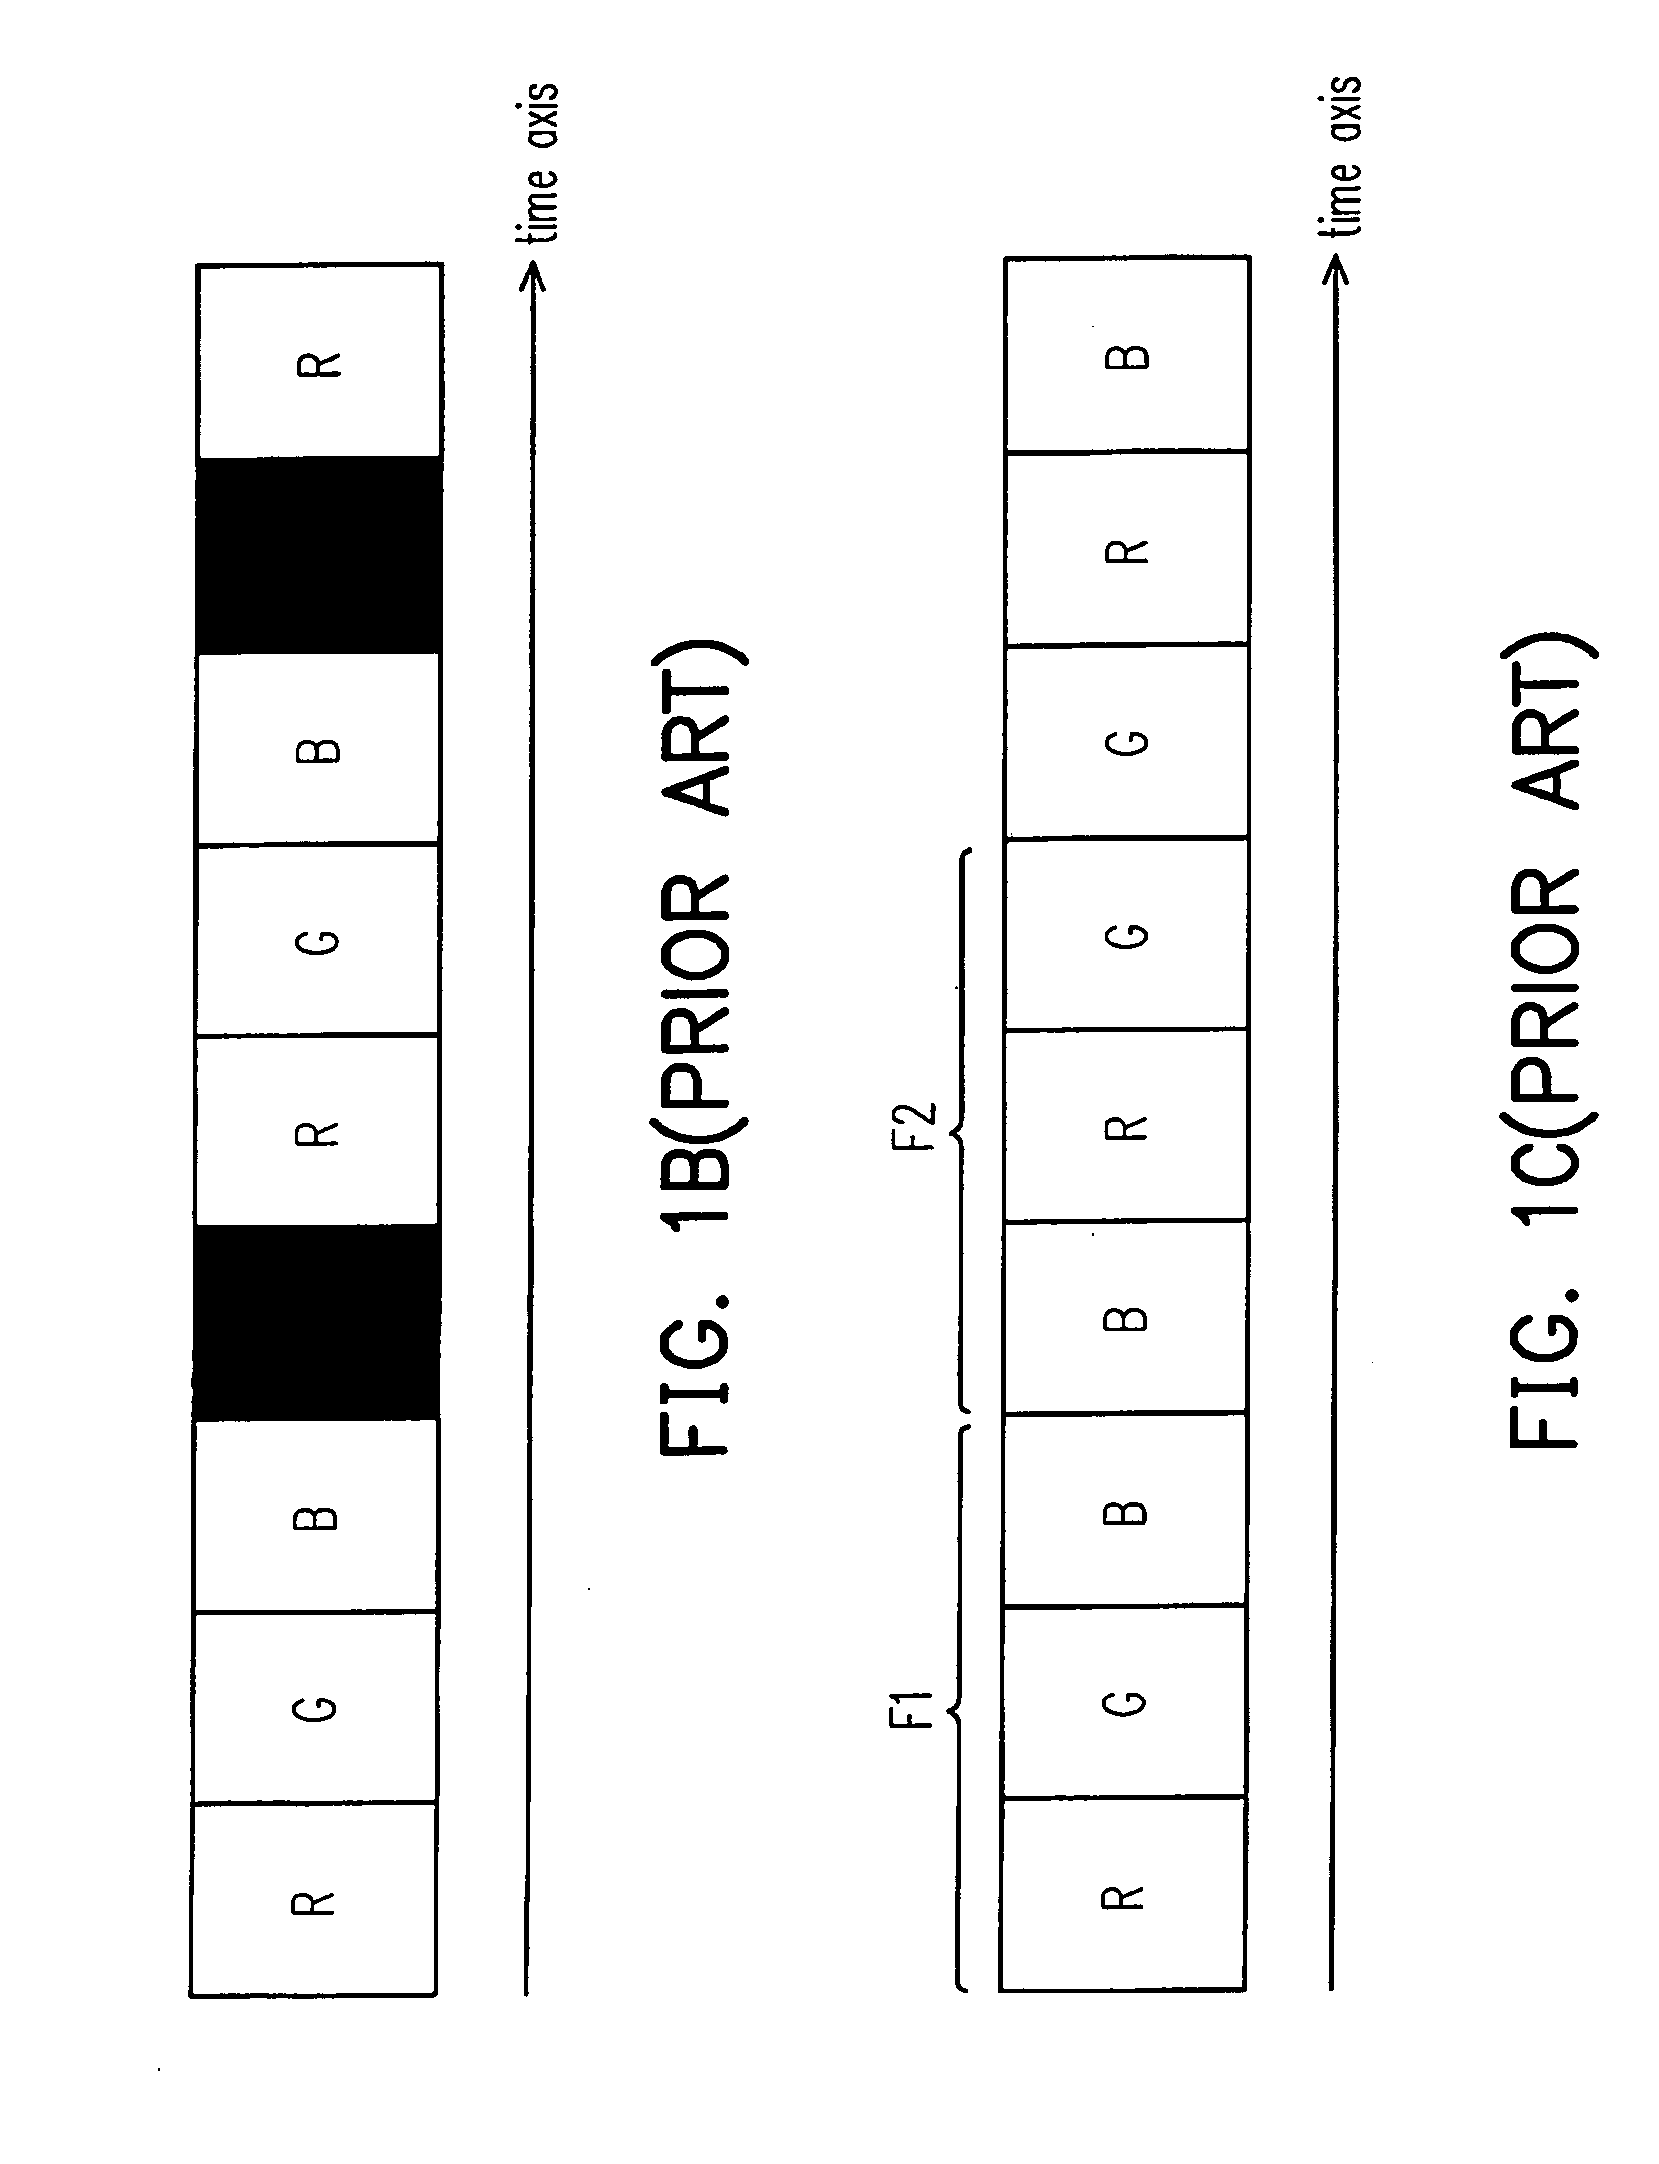 Method for driving a display